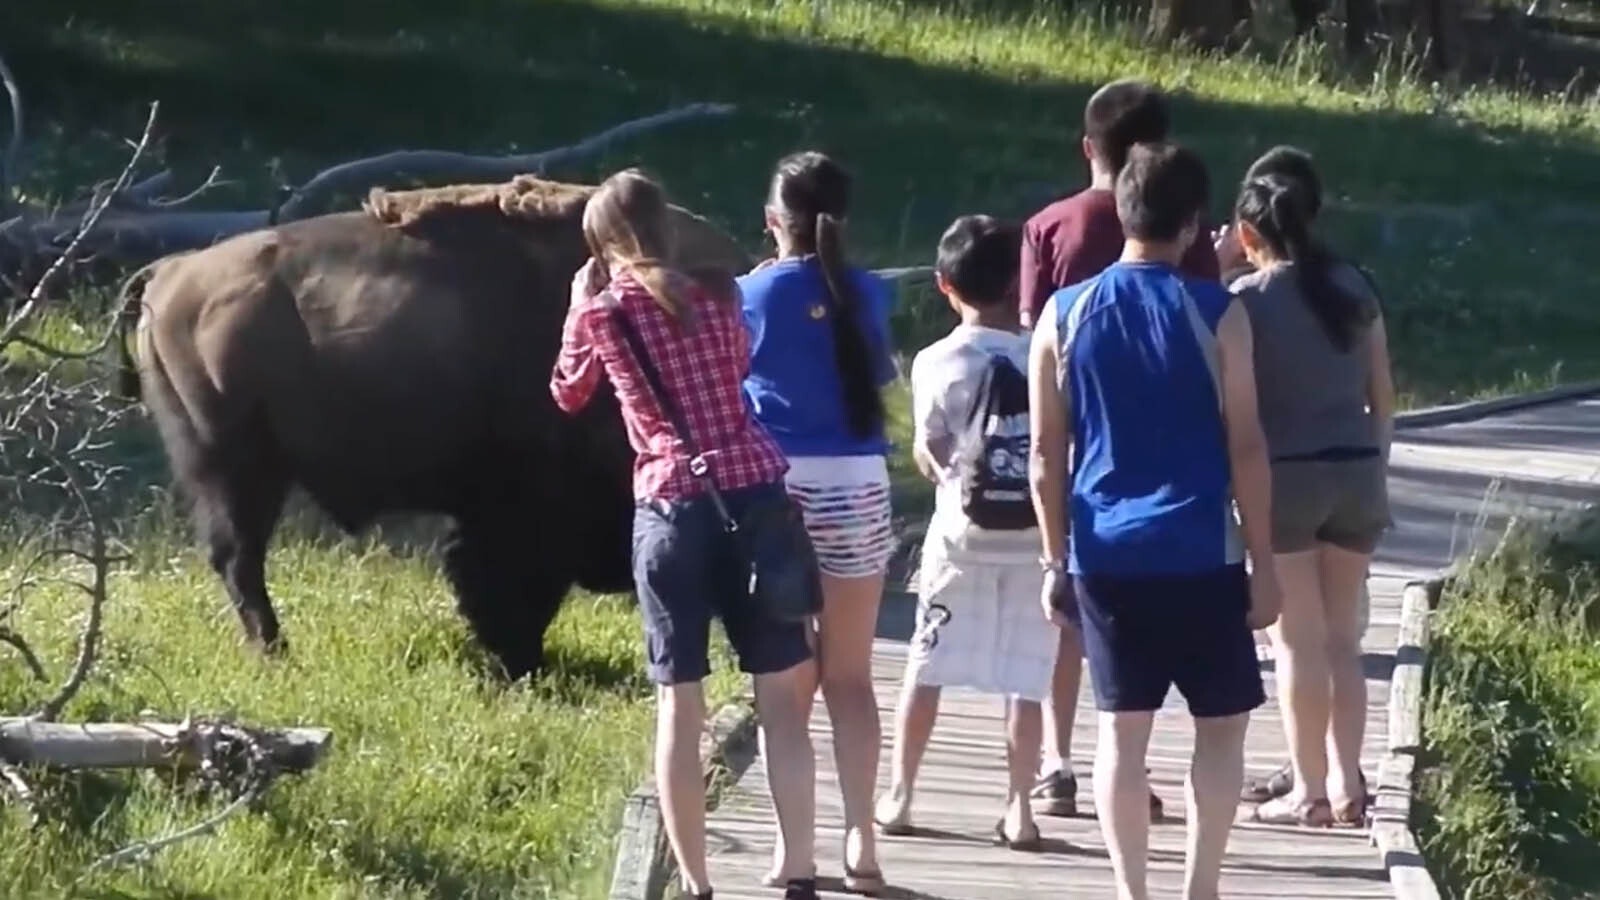 A group of tourists from China learns the hard way that approaching wildlife in Yellowstone National Park is a no-no.